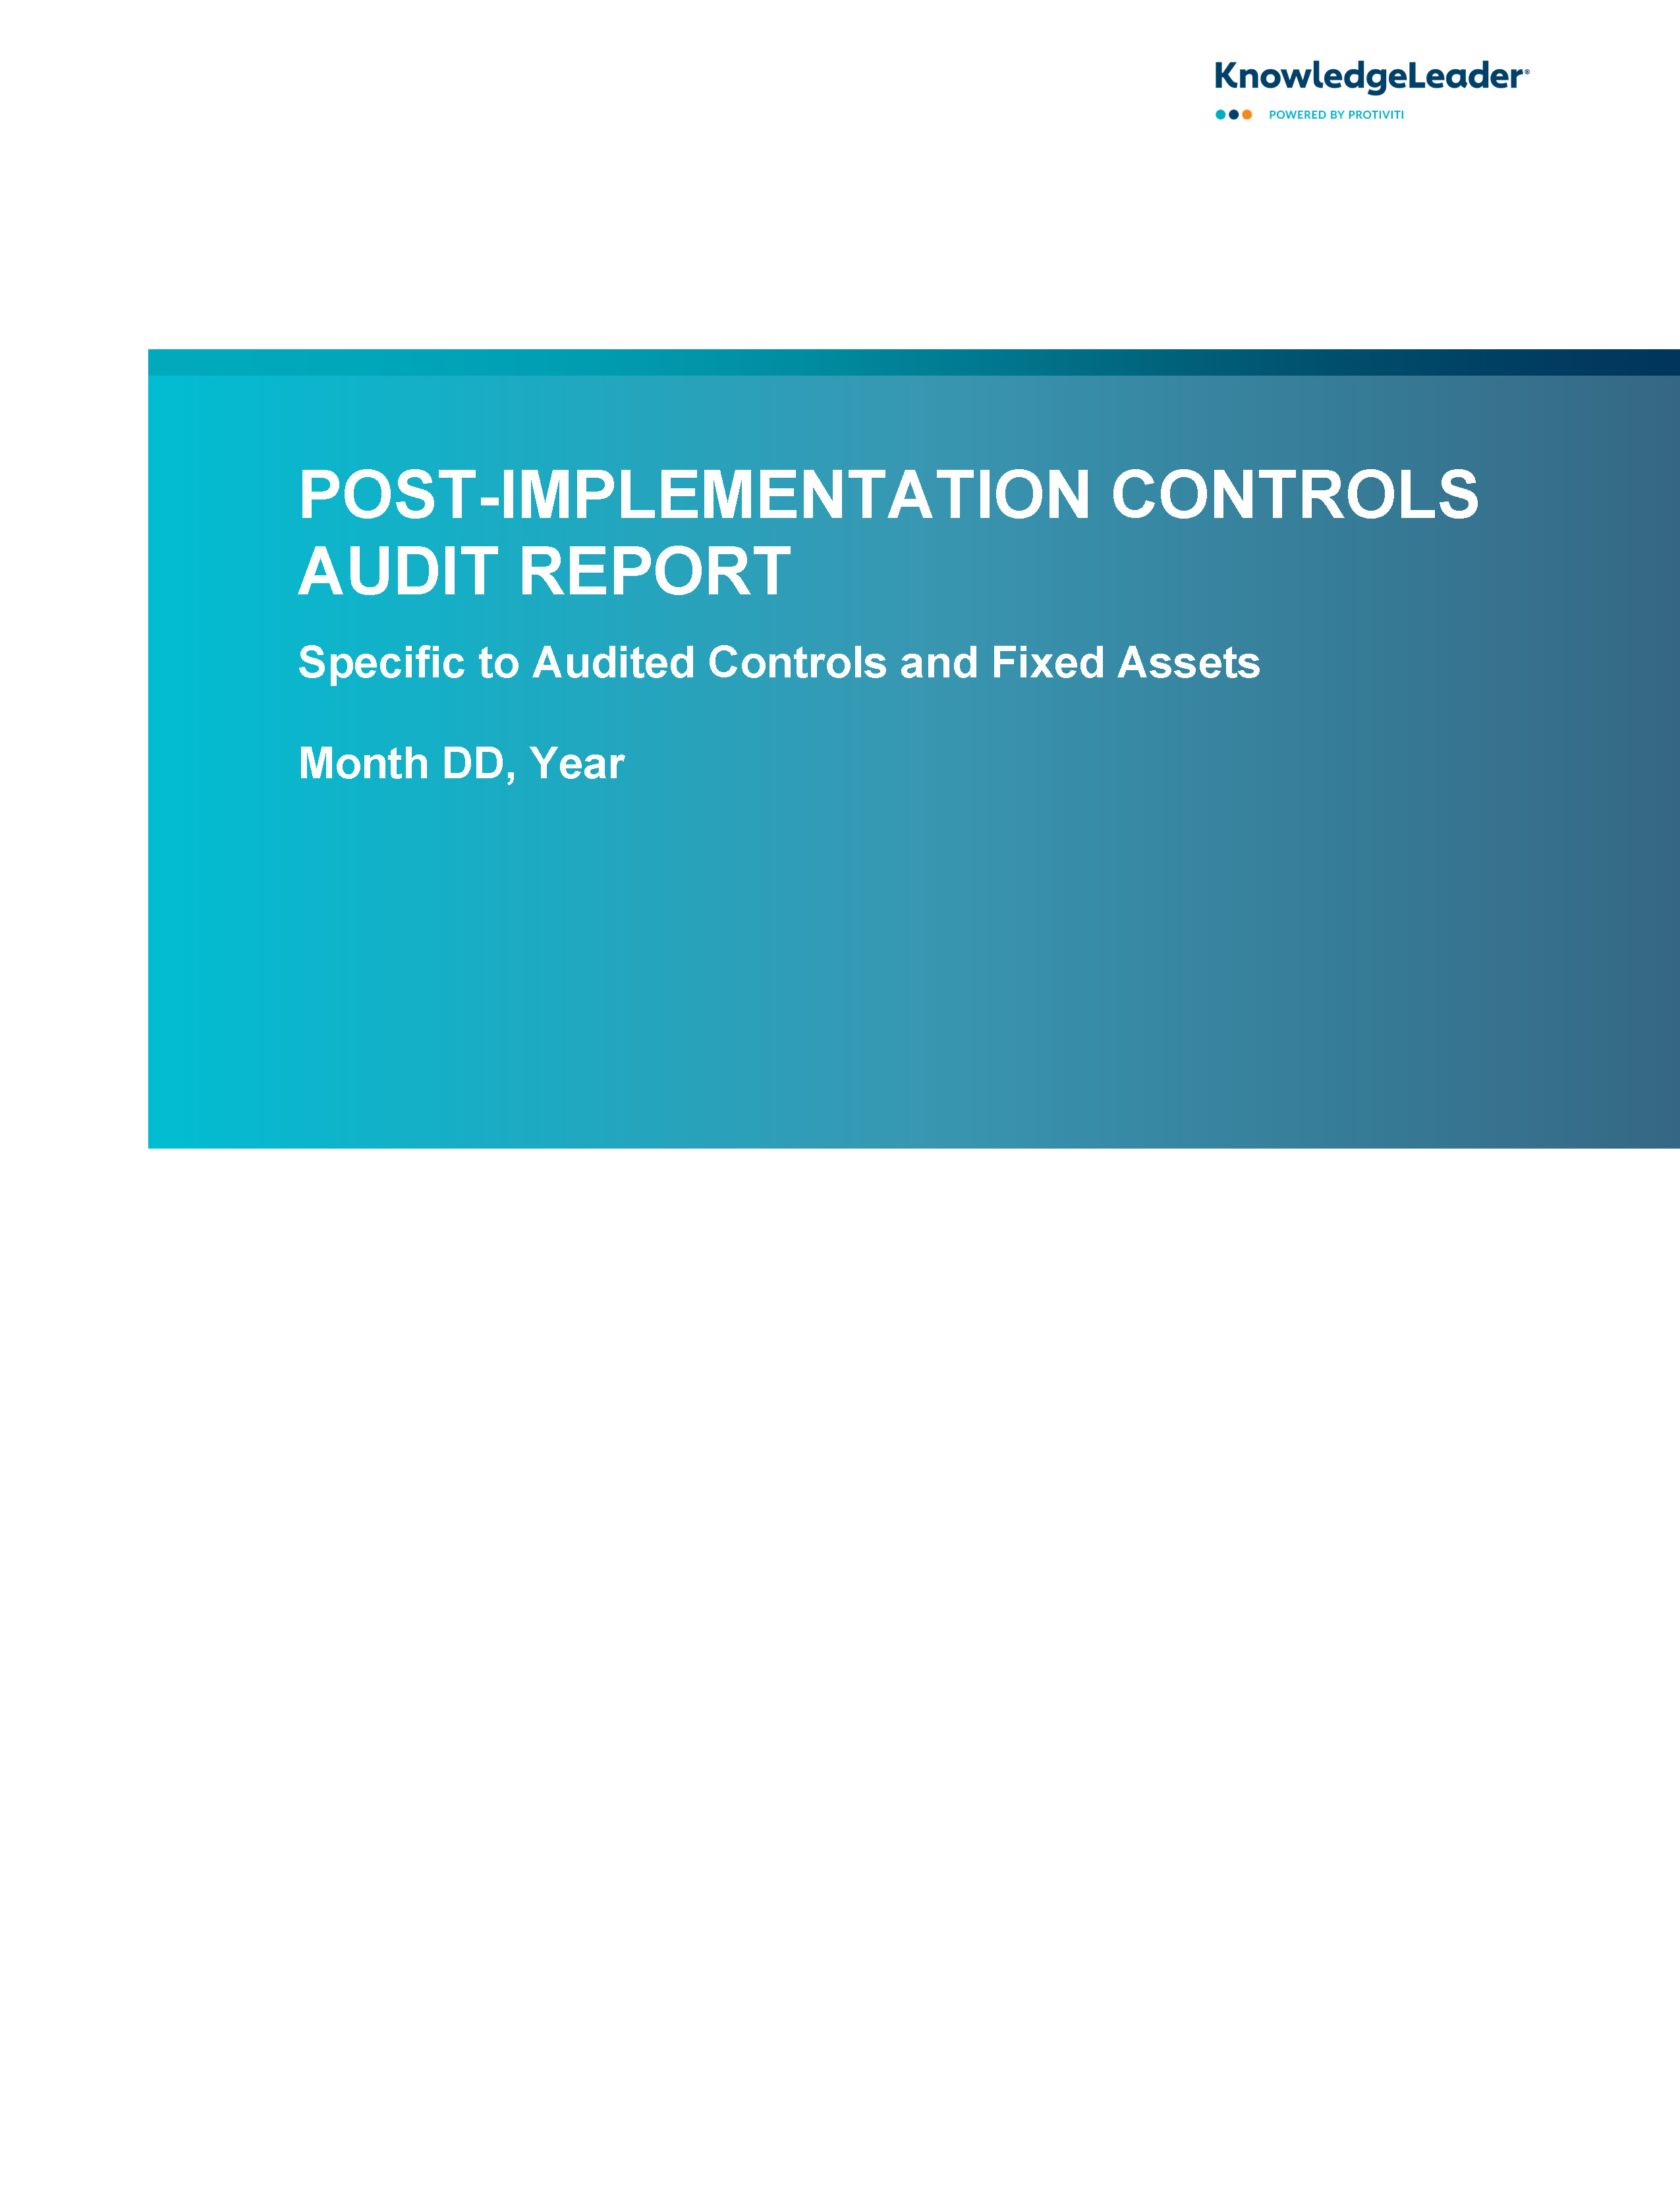 Screenshot of the first page of Post-Implementation Controls Audit Report